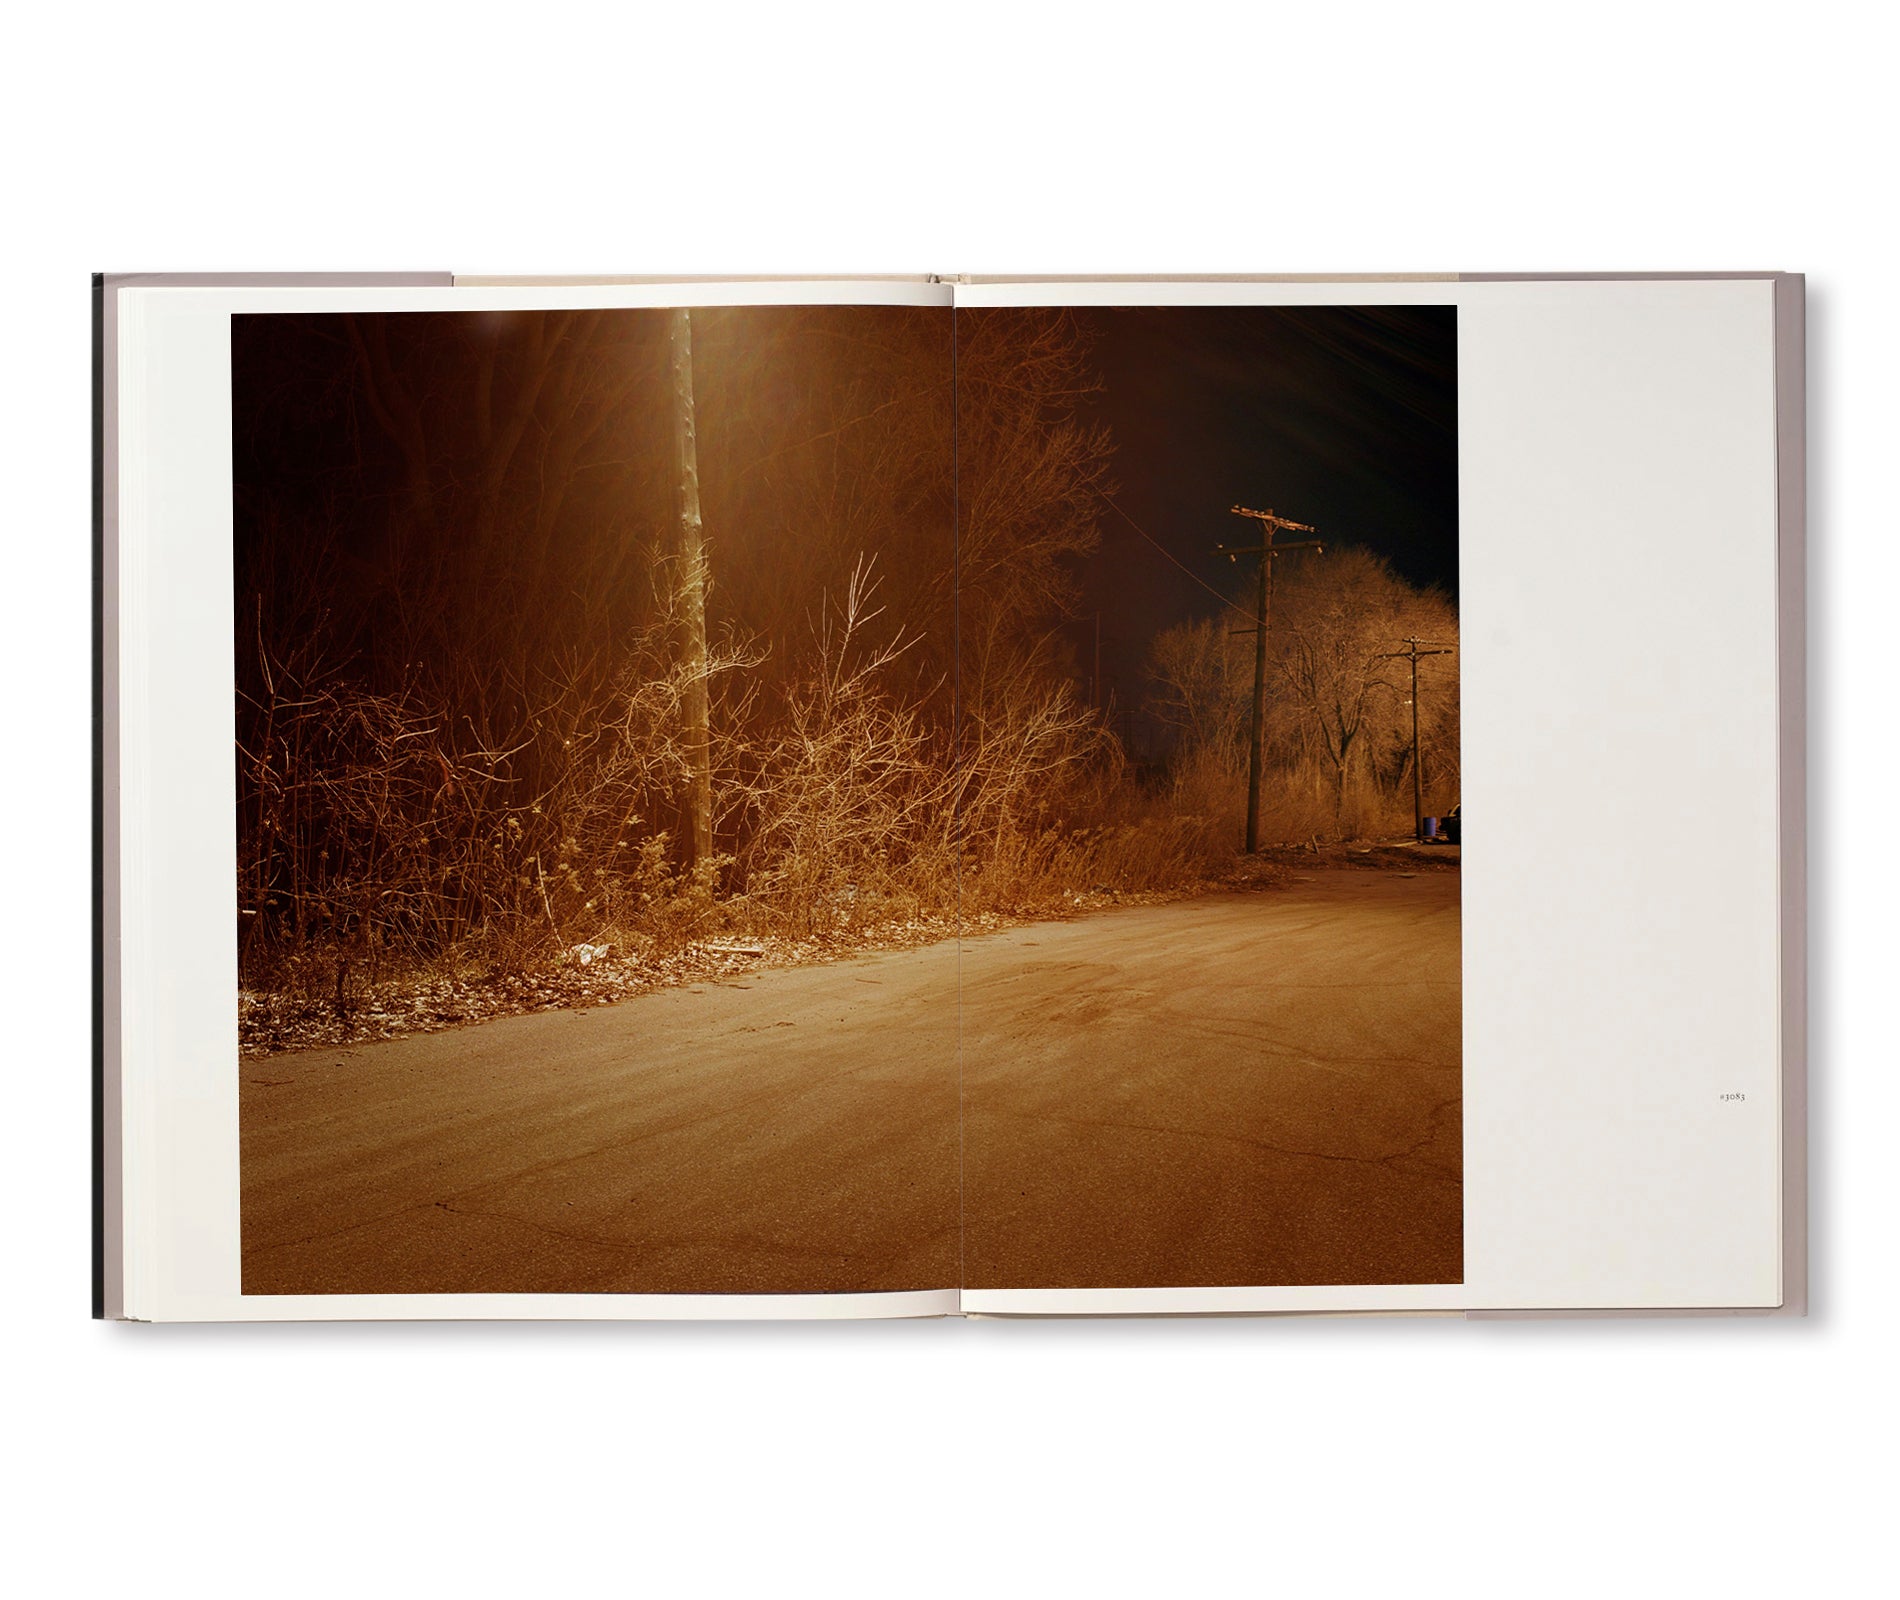 OUTSKIRTS by Todd Hido